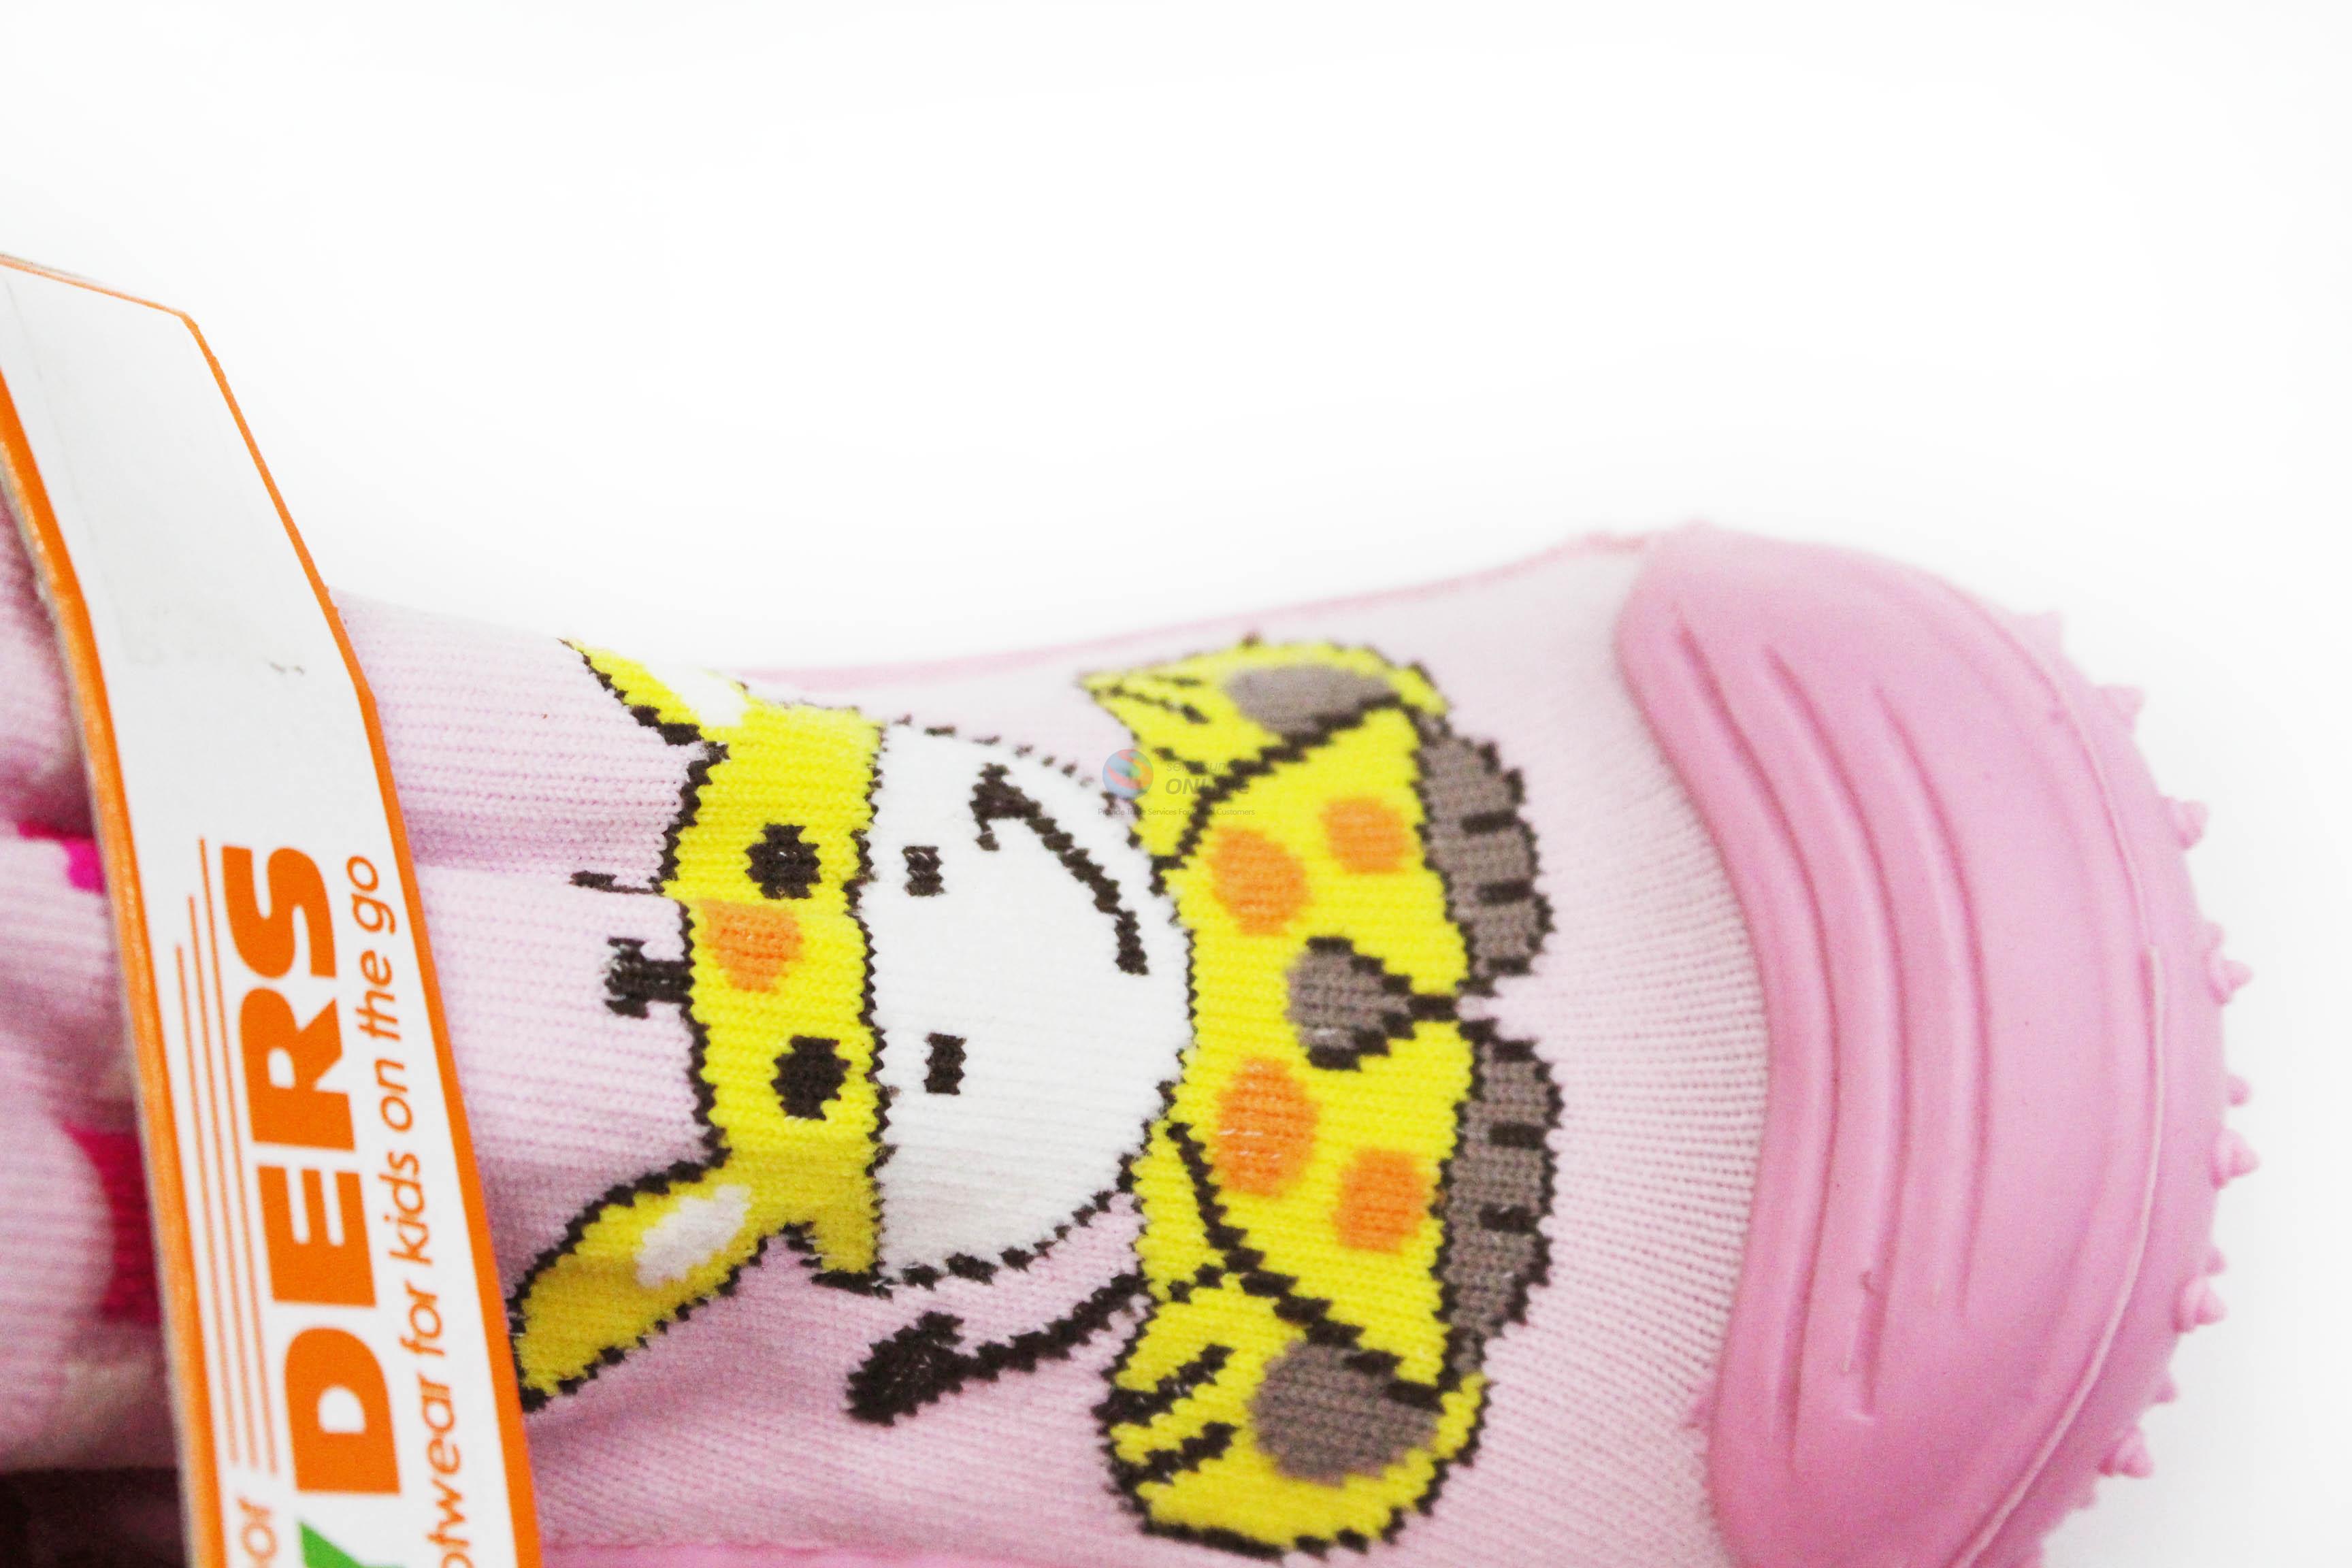 Cheap Promotional Cute Cartoon Baby Socks With Rubber Soles